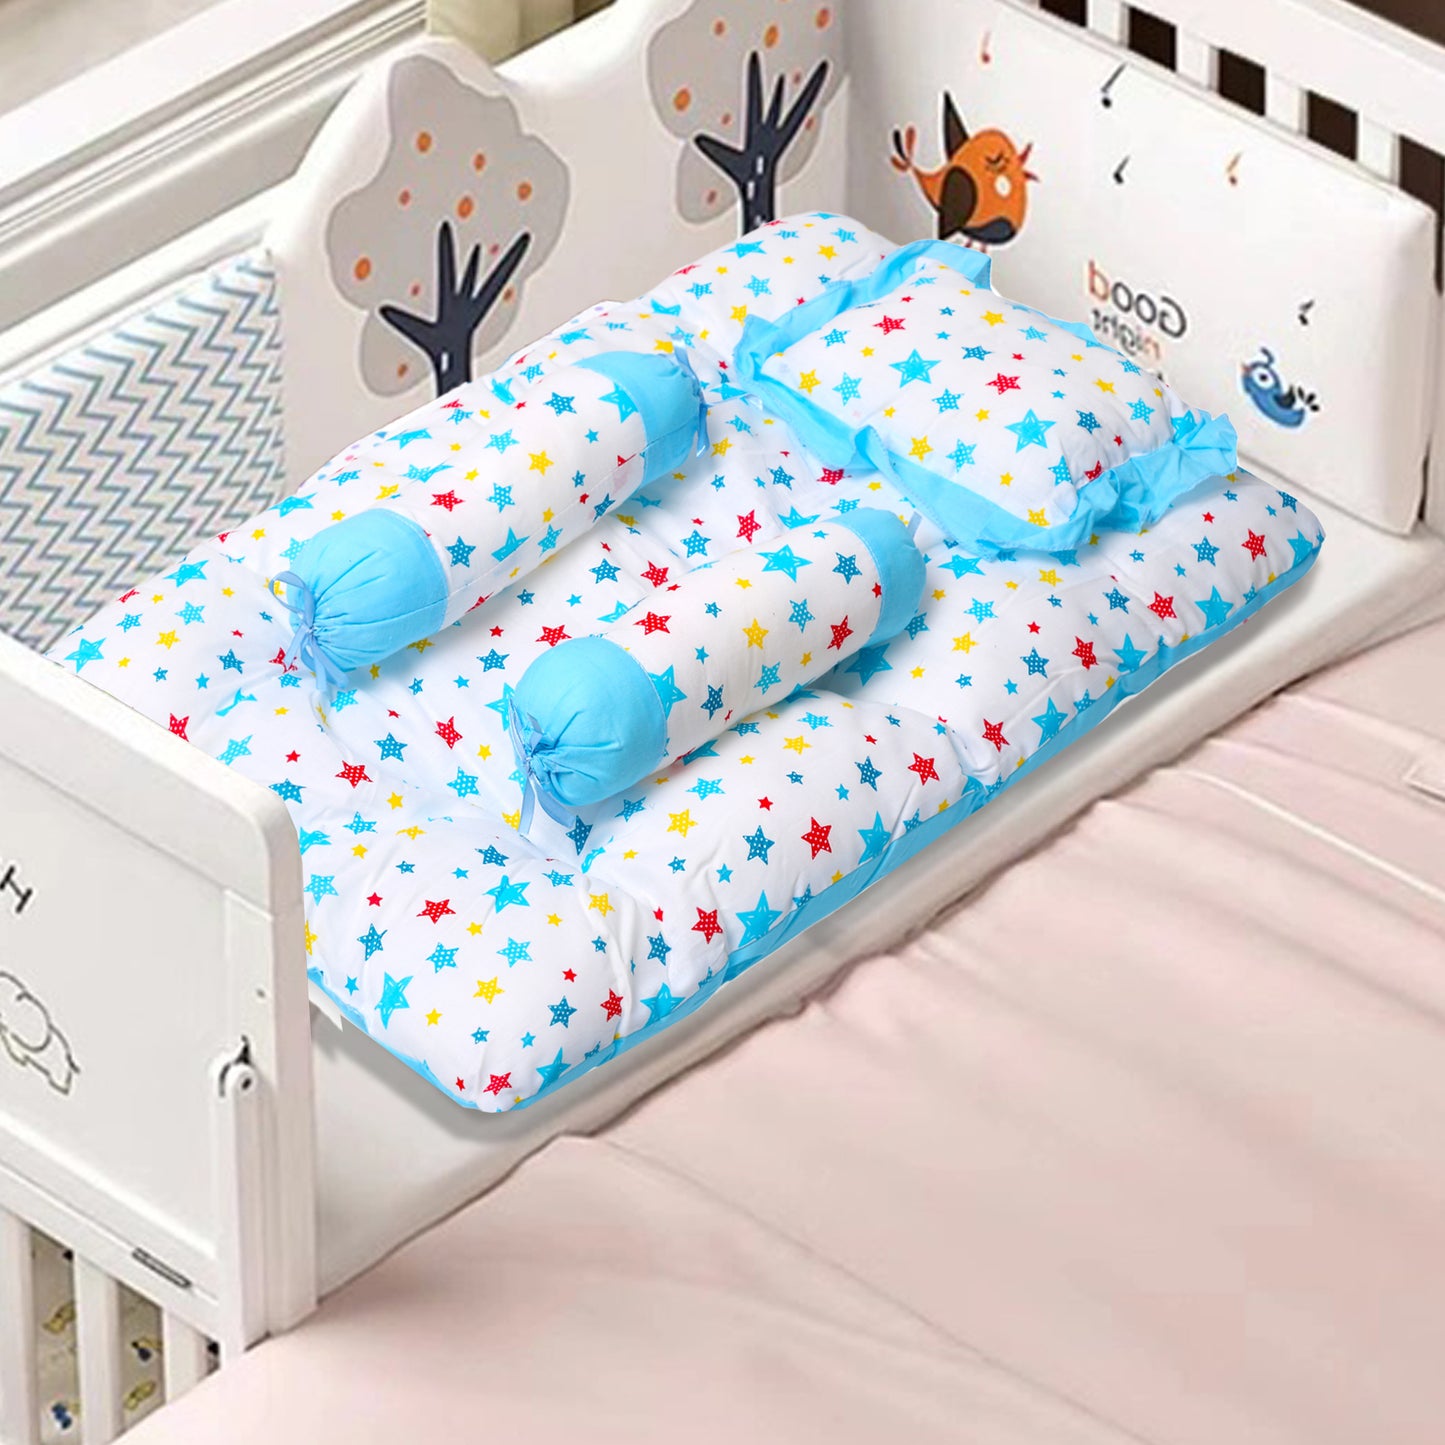 VParents joy Baby 4 Piece Bedding Set with Pillow and Bolsters Sleeping Bag and Bedding Set and Feeding Pillow Combo